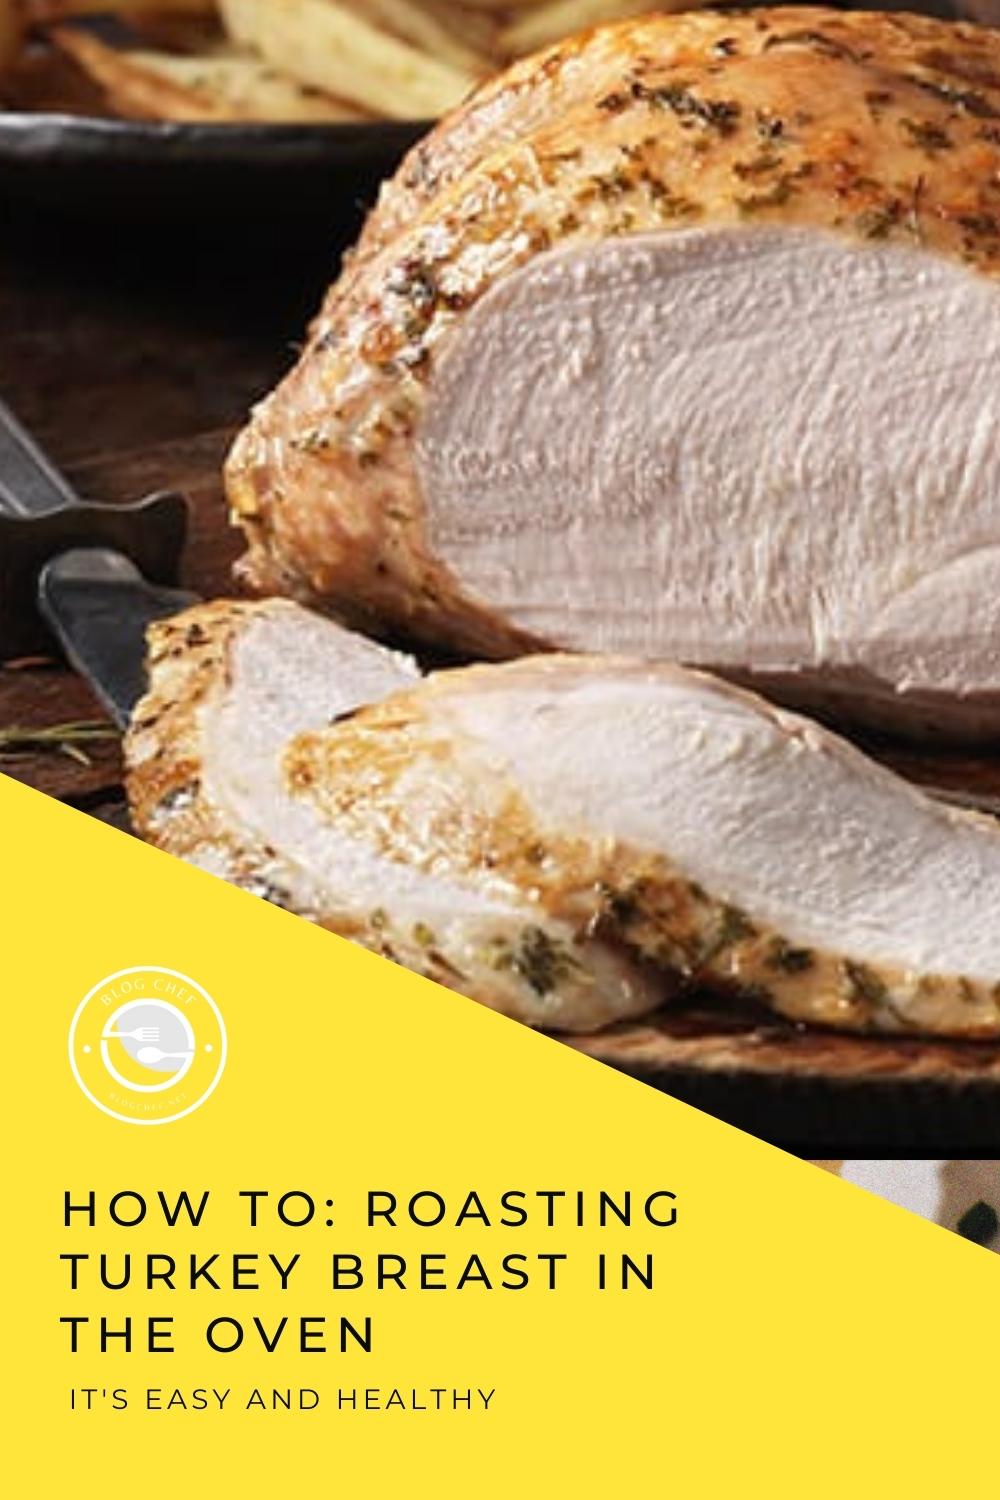 How to roast a Butterball turkey in the oven.